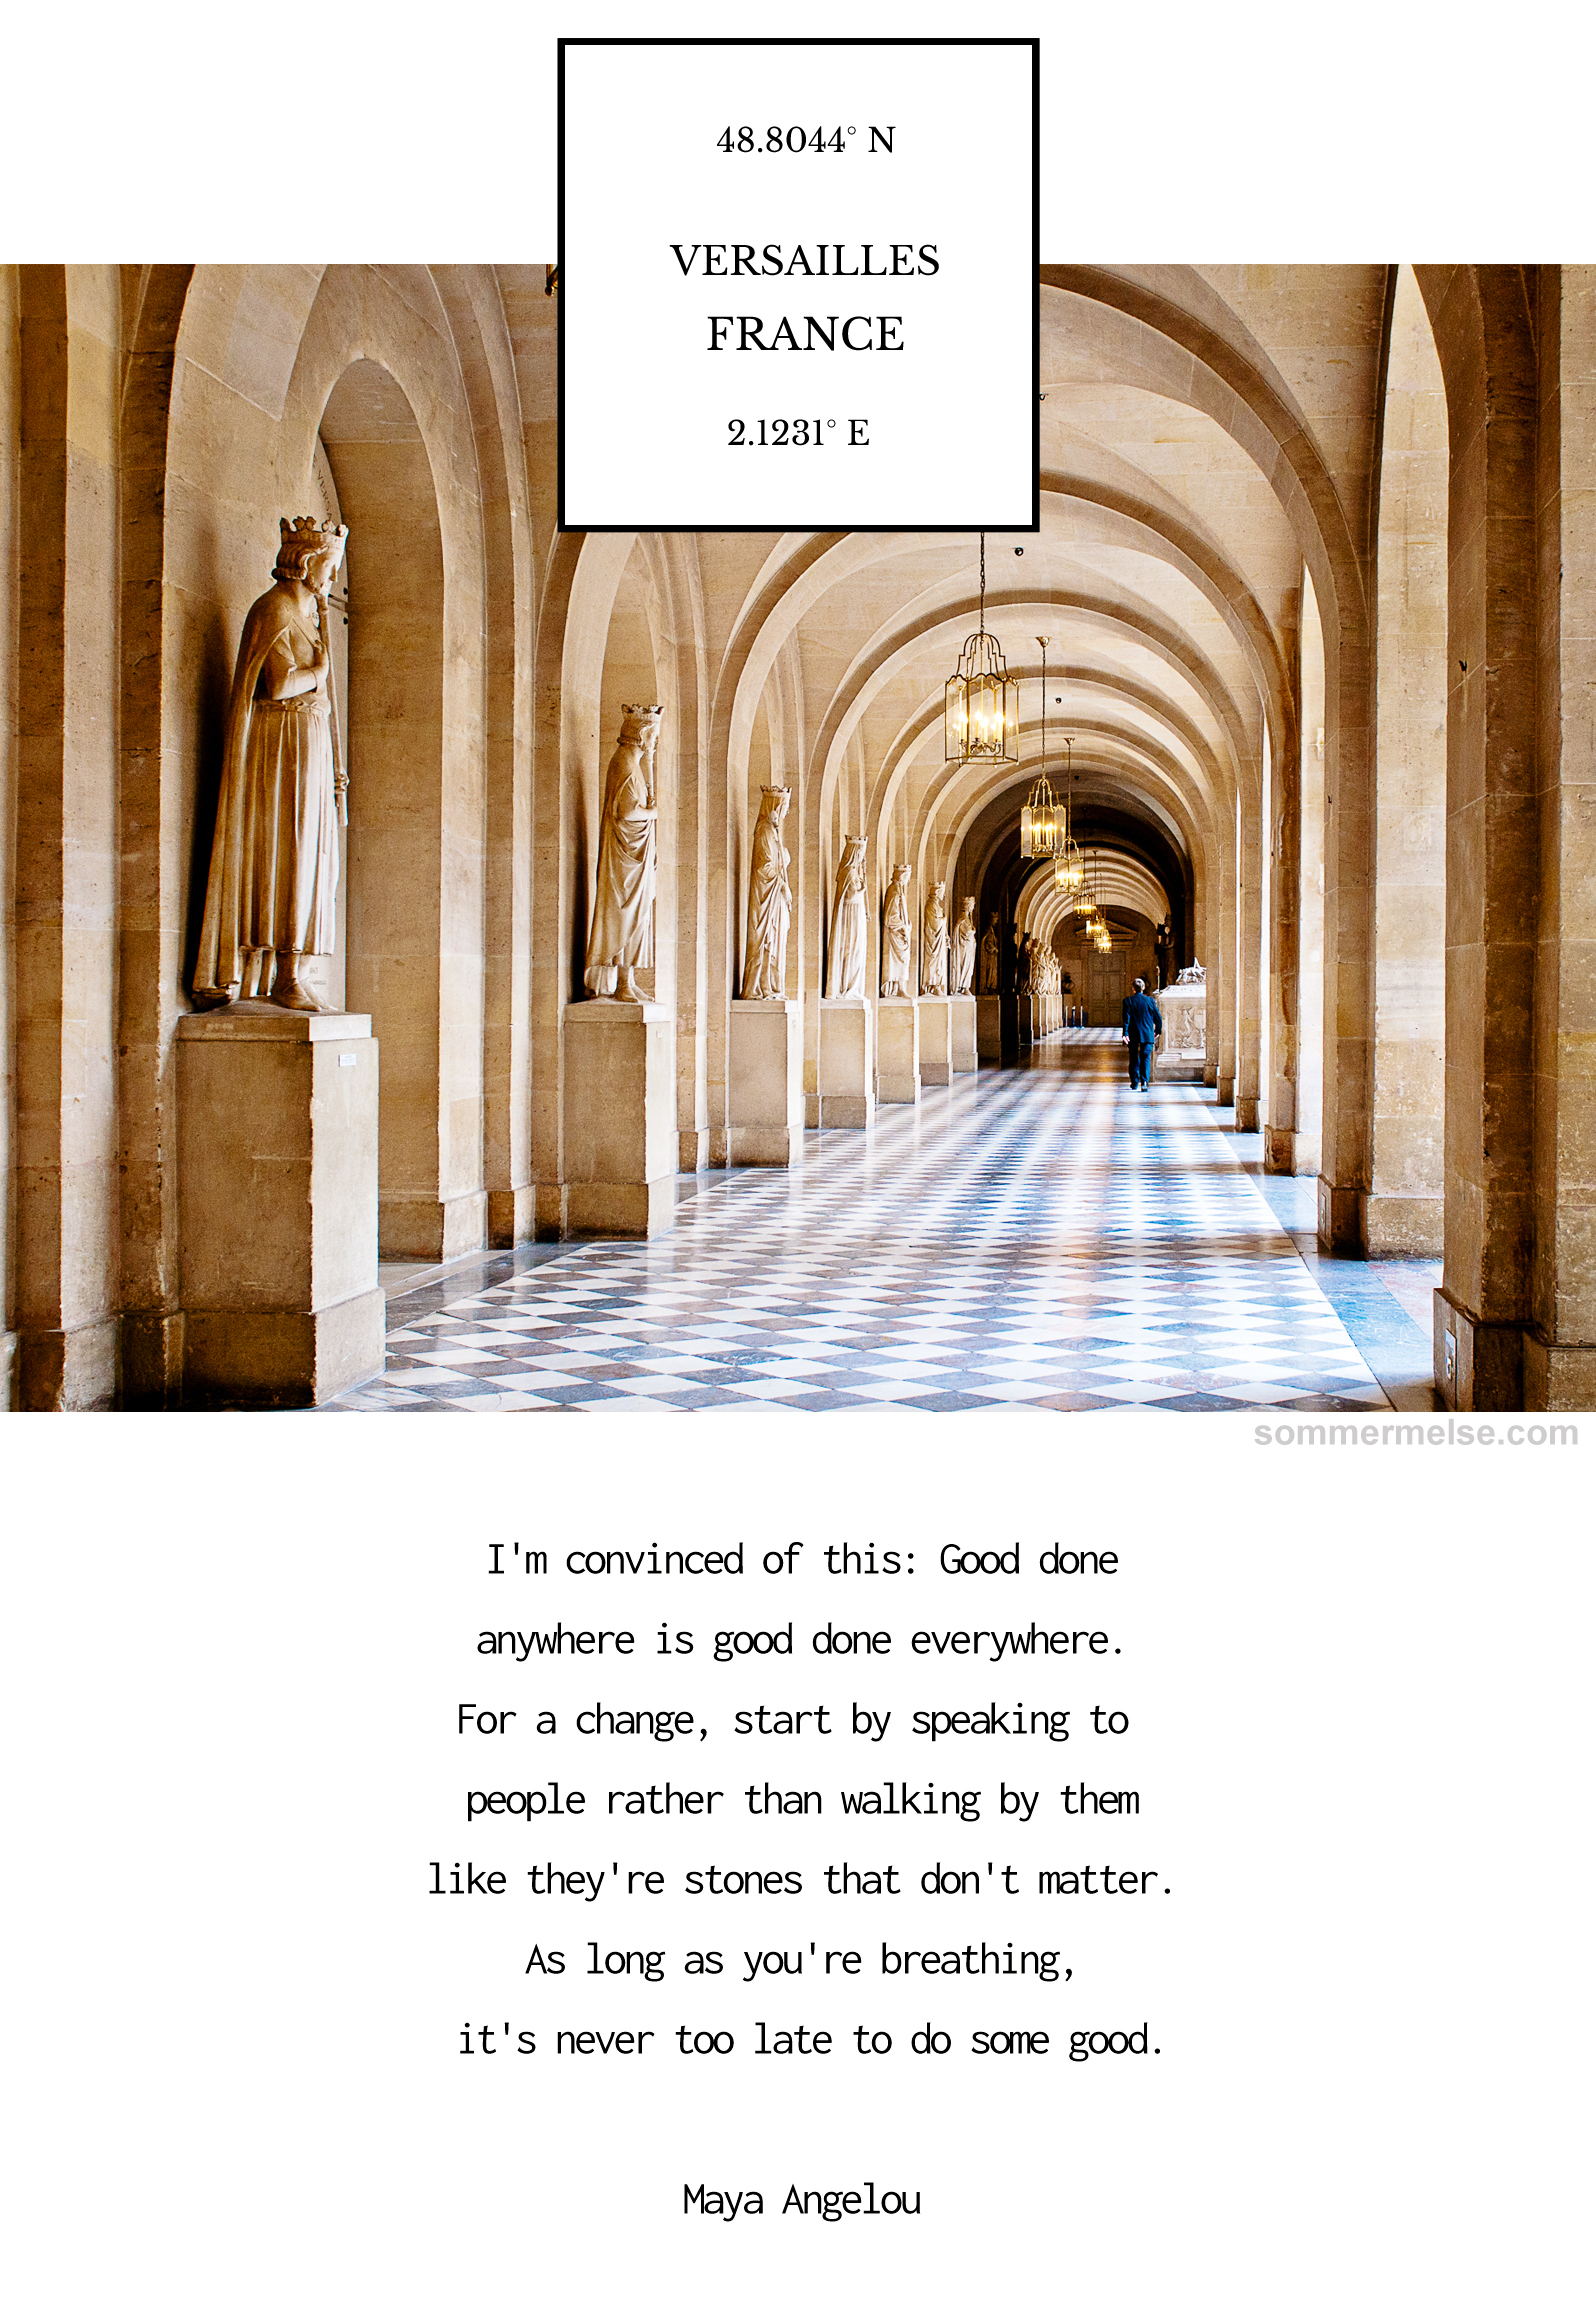 to_use_finding_wonder_versailles_france_its_never_too_late_maya_angelou